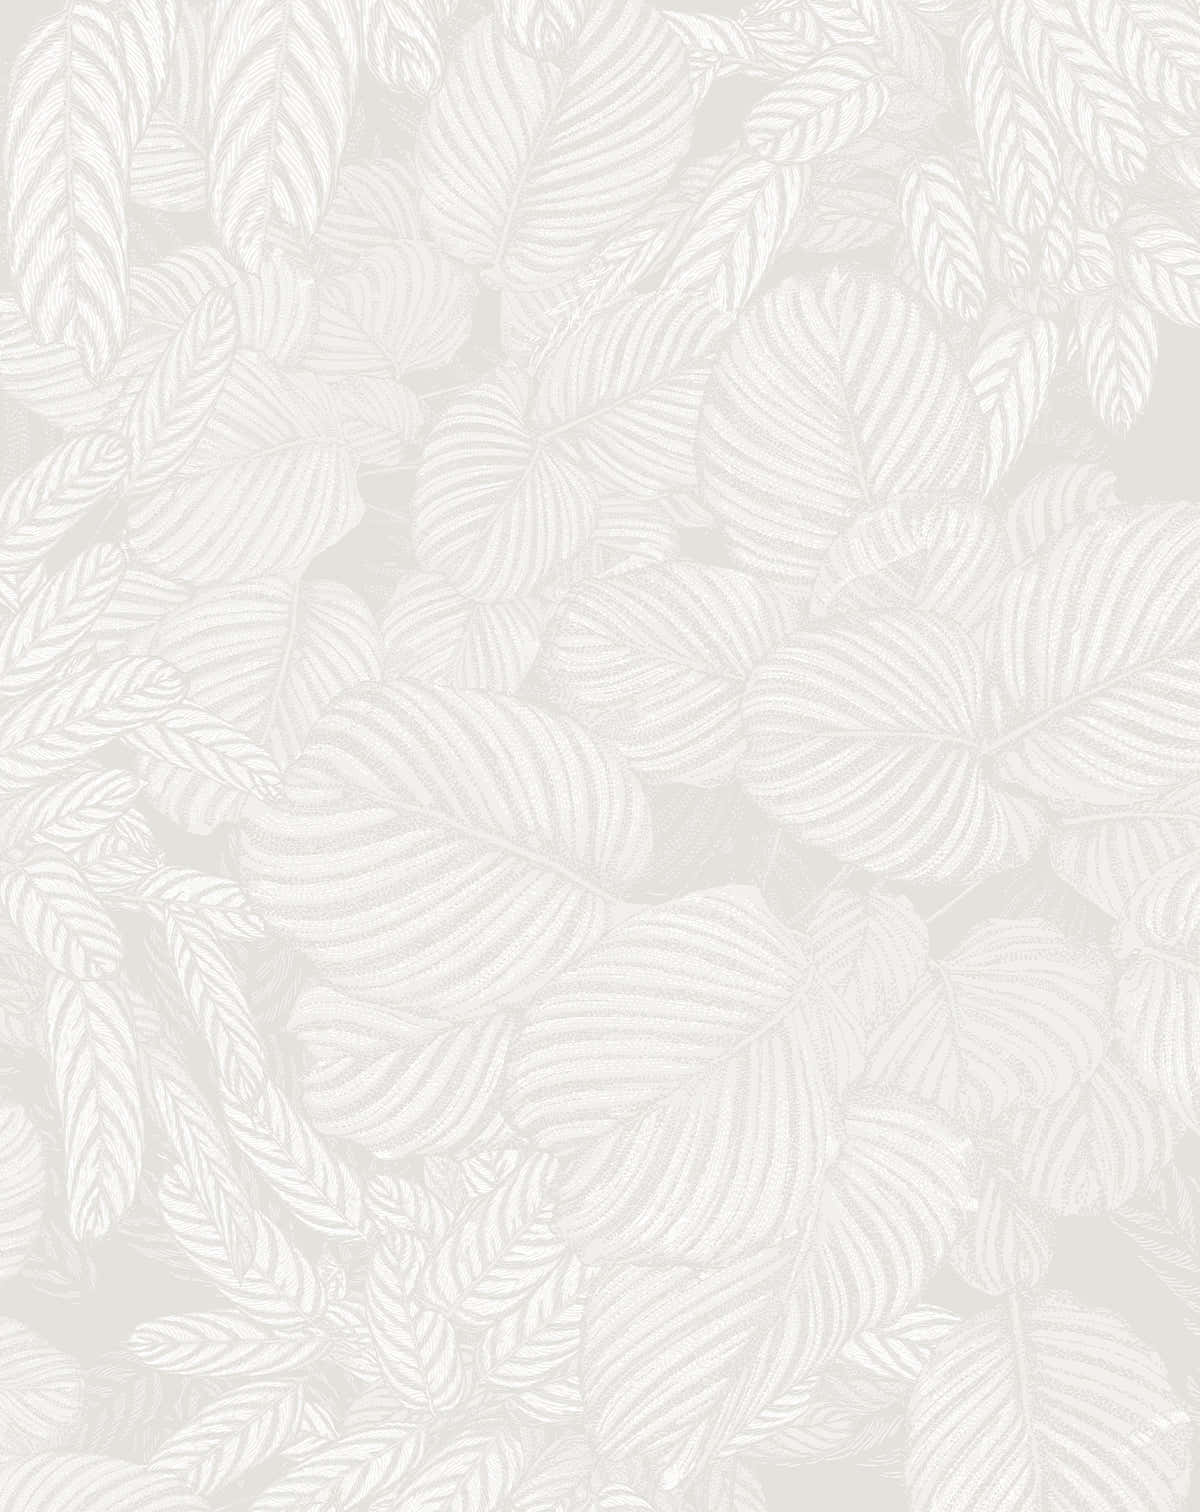 Impartial Gray Tropical Leaves Wallpaper